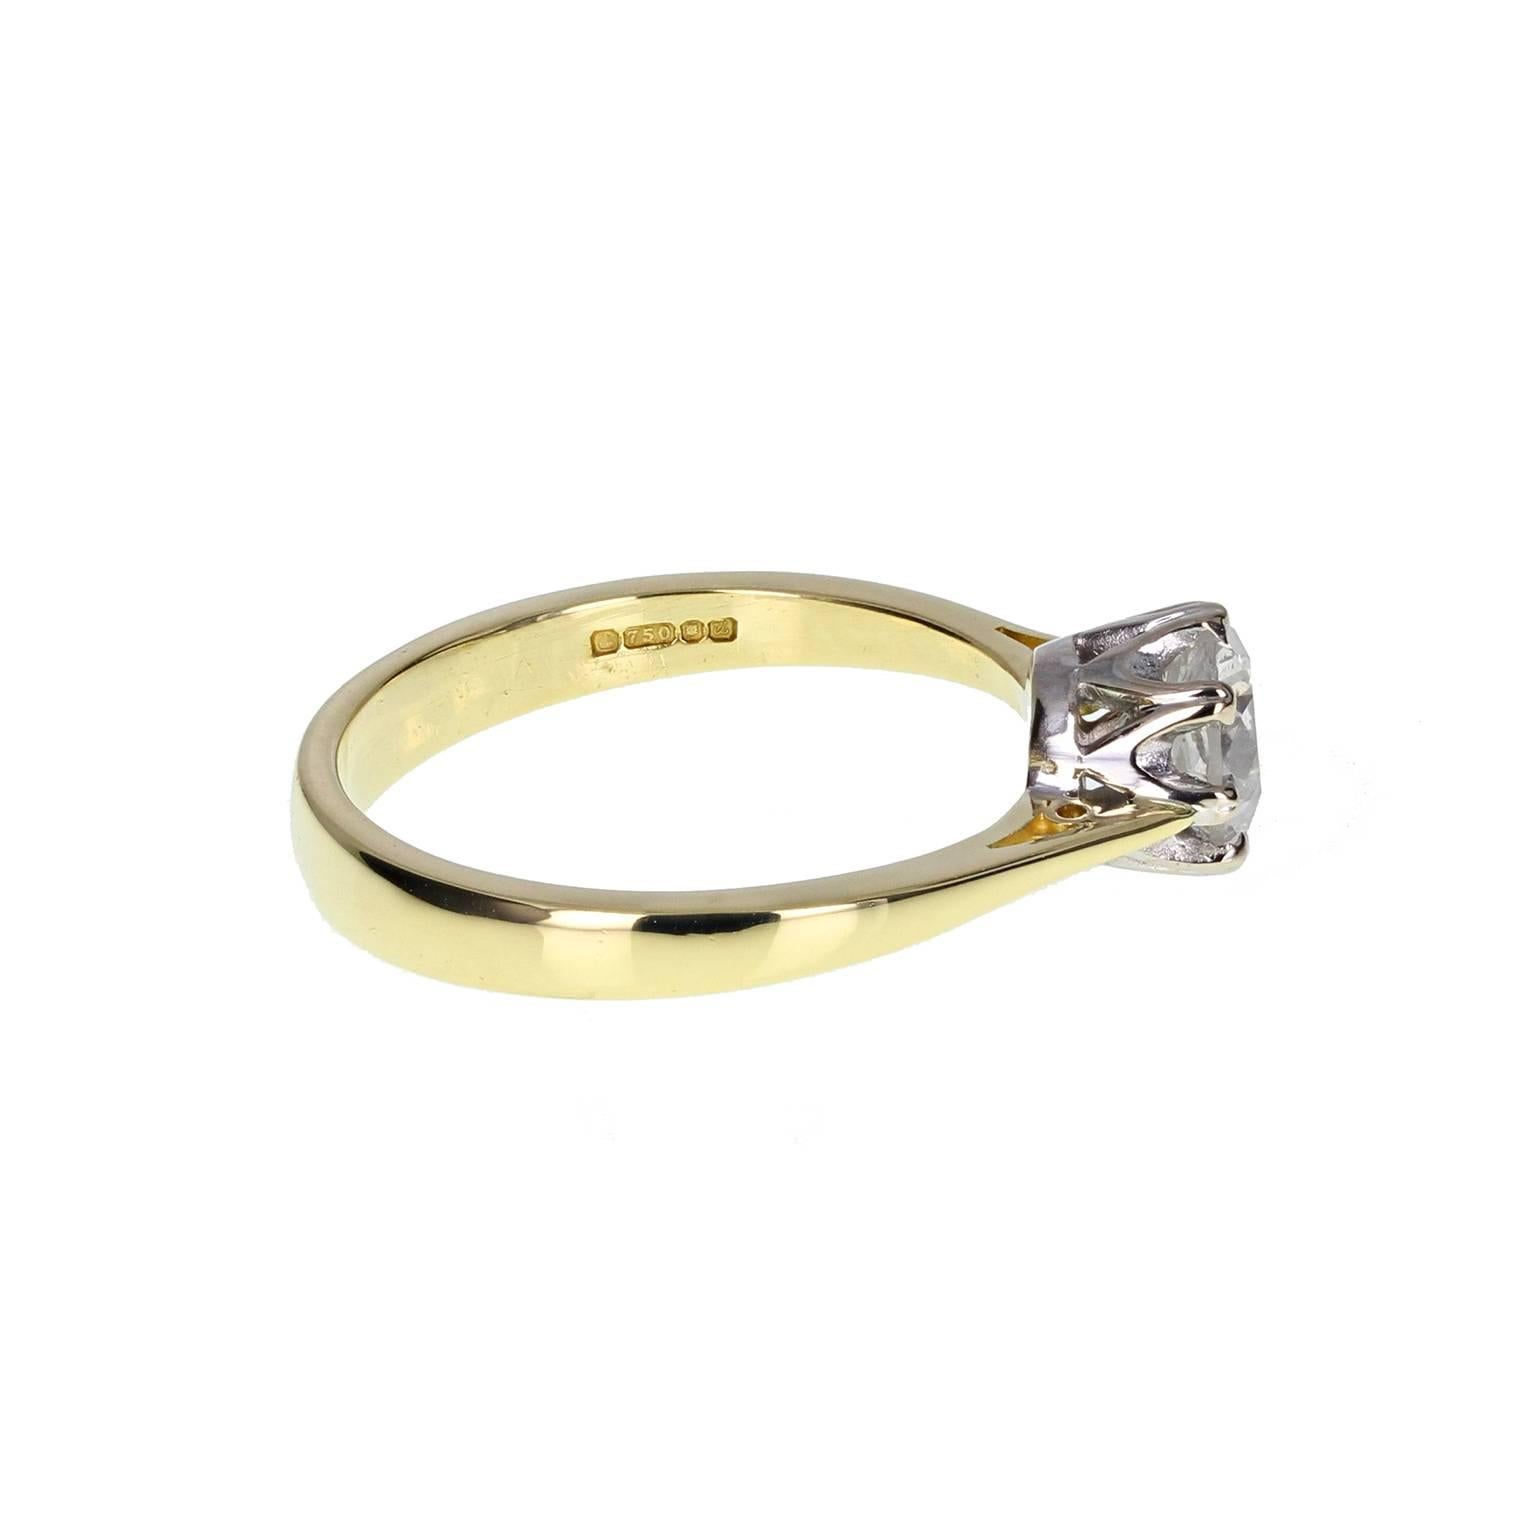 A fine quality diamond solitaire engagement ring in classic style. A one carat brilliant-cut diamond mounted in an 18 carat white gold 8-claw basket setting on a squared 18 carat yellow gold shank with knife-edge shoulders. London Hallmark 1994.